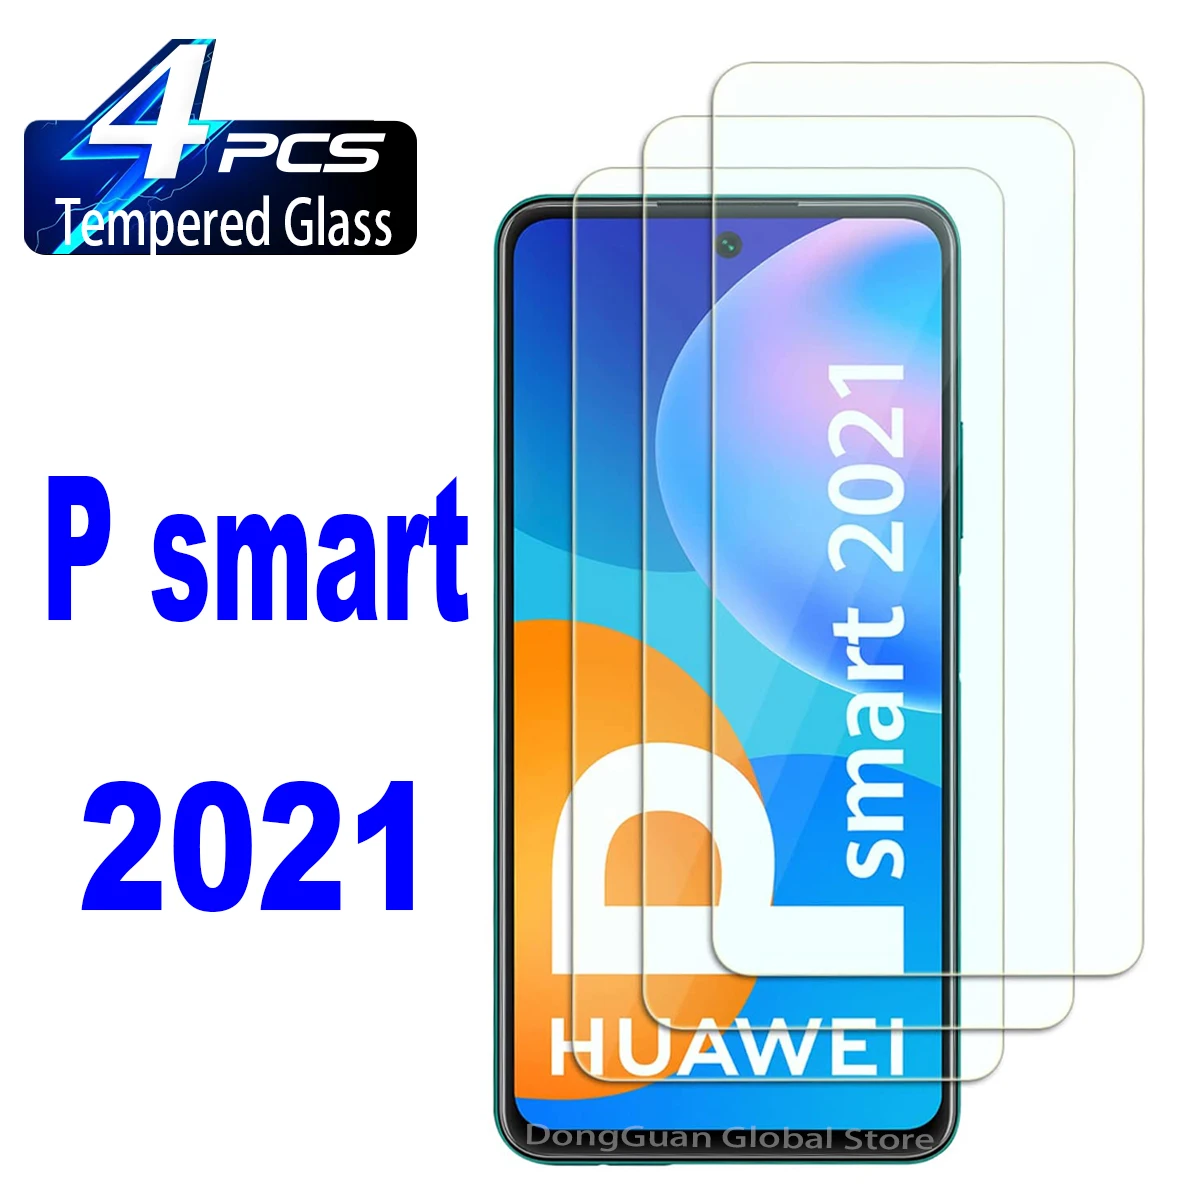 

4Pcs Tempered Glass For Huawei P smart 2021 Z 2020 Y6 Y7 Y9 Prime 2019 P40 E Lite P20 P30 P50 Y7A Screen Protector Glass Film